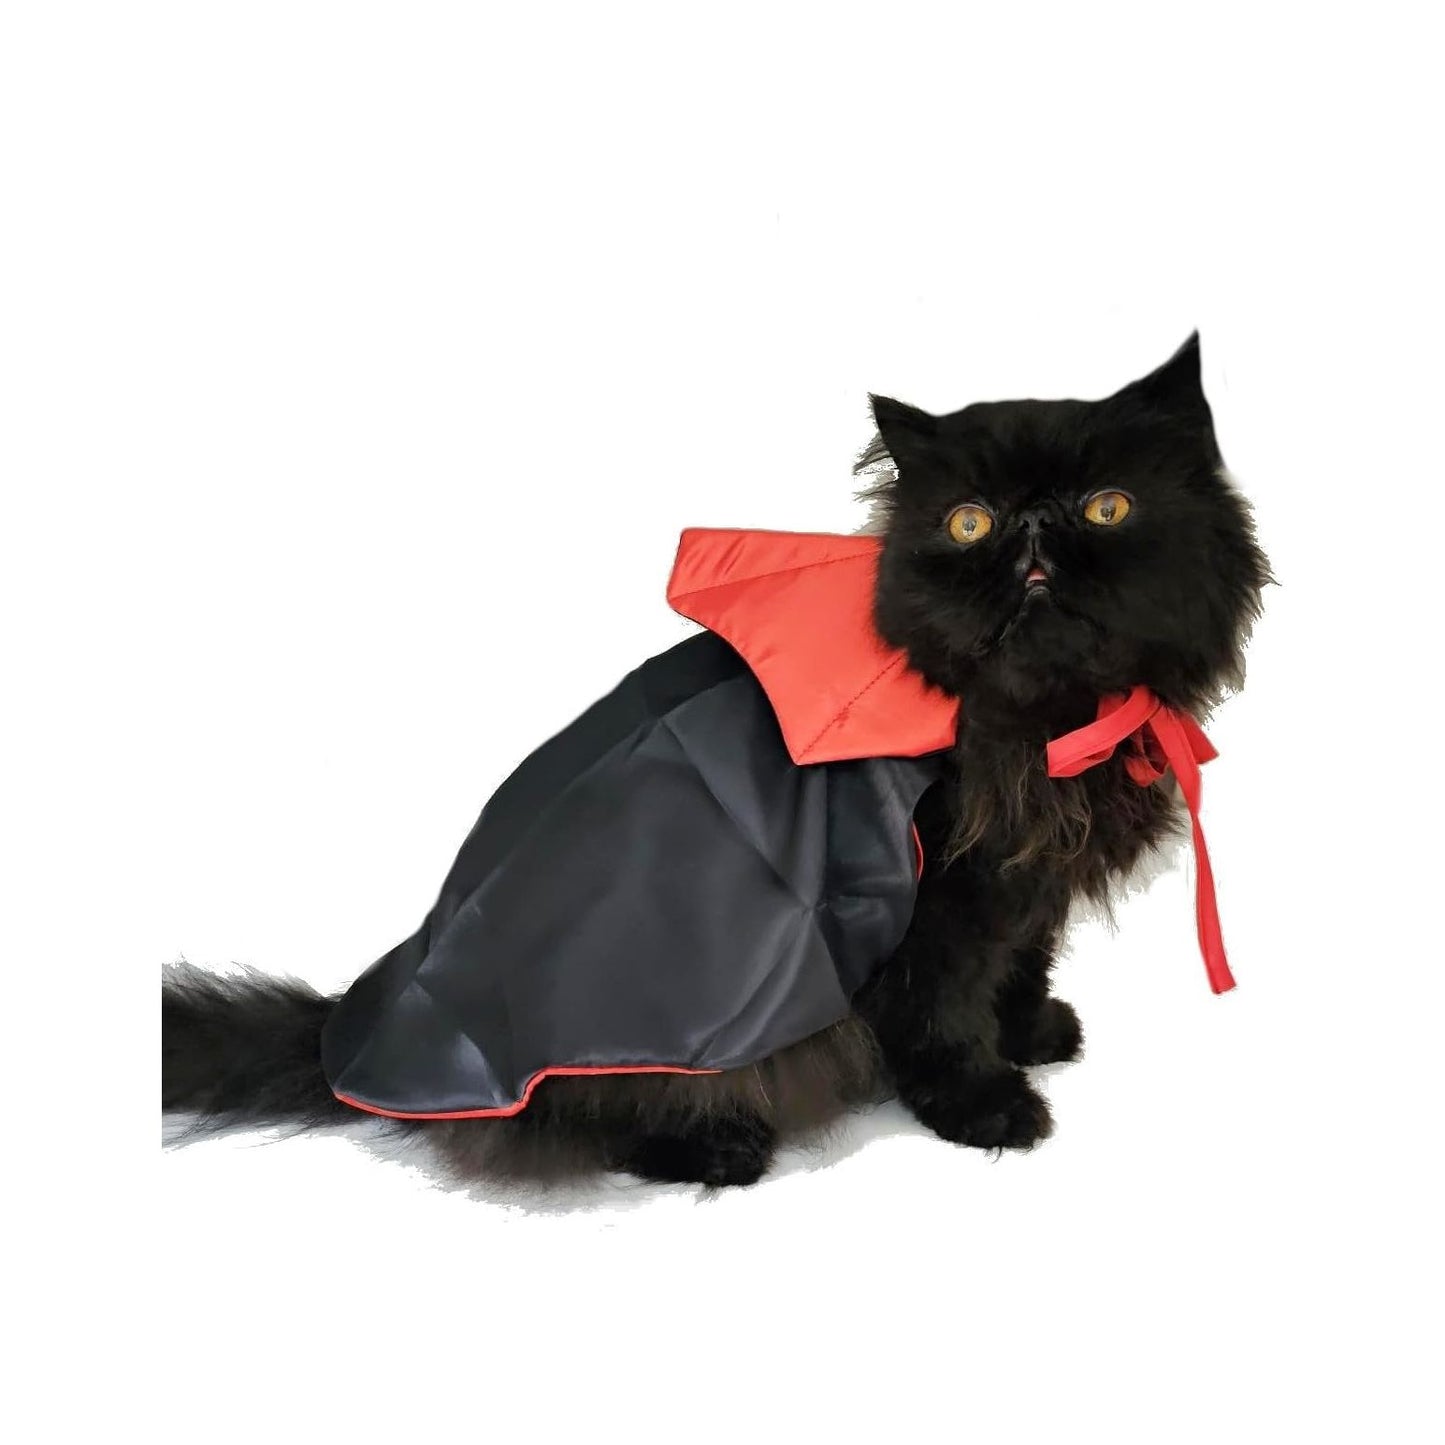 Cute Funny SMALL DOG ONLY Doggie Puppy Cat Accessories Halloween Outfit Girl Boy Coat Clothes Hoodies Fancy Dress Costume Ideas Black Red Reversable Dracula Vampire Cape